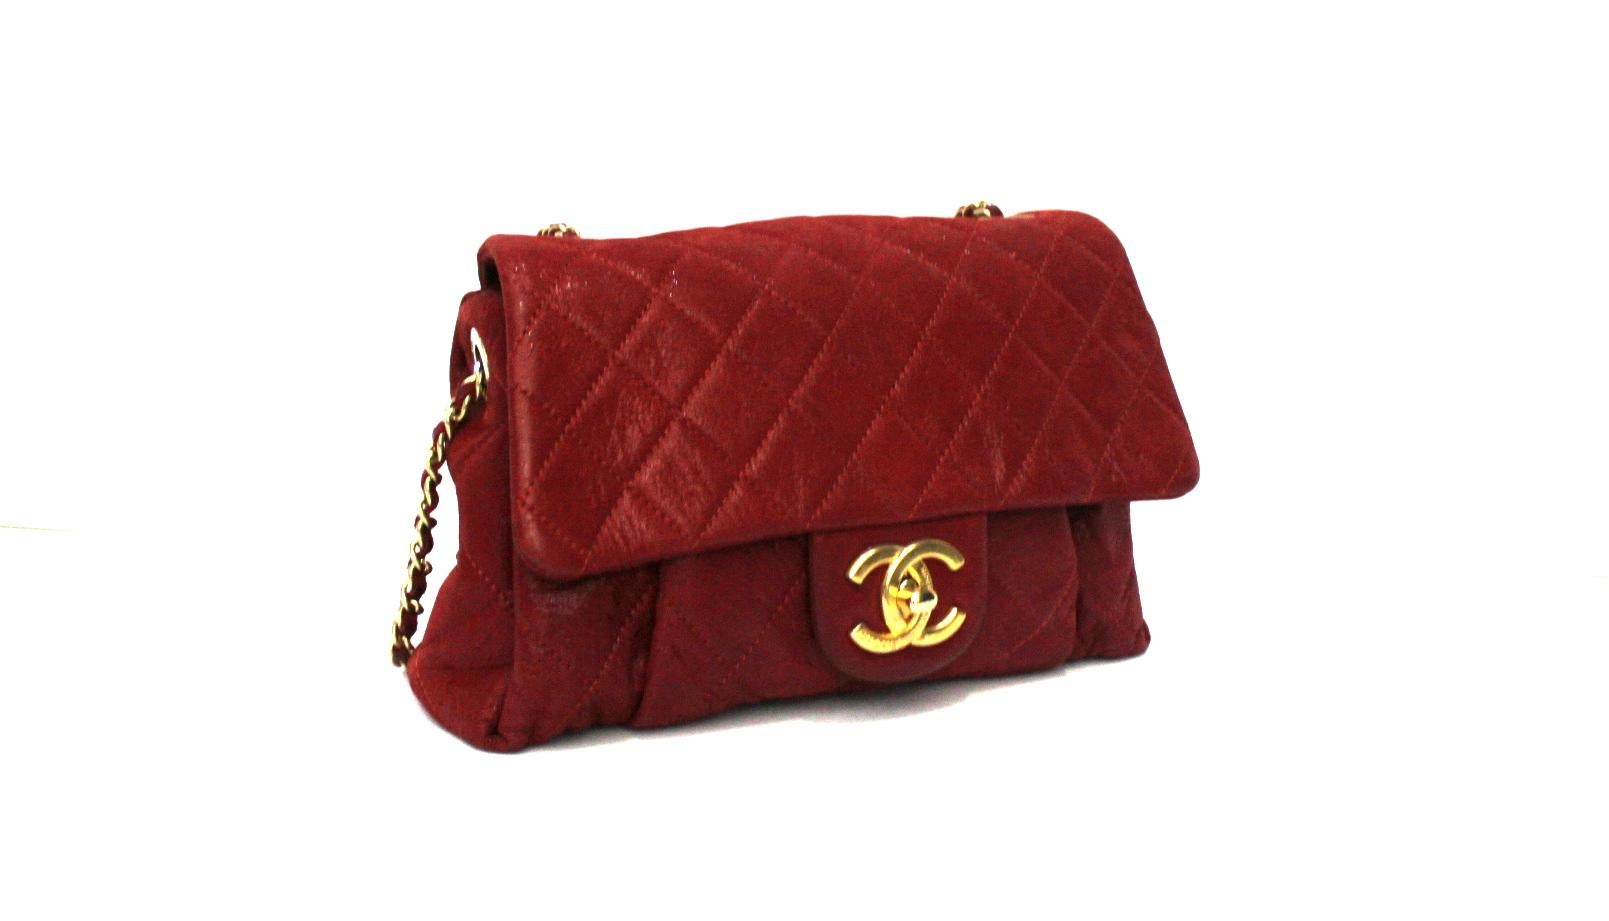 Chanel bag made of red leather with golden hardware.
Closure with CC logo, internally quite large.
Equipped with leather shoulder strap and adjustable chain.
The bag is in good condition, 2014.